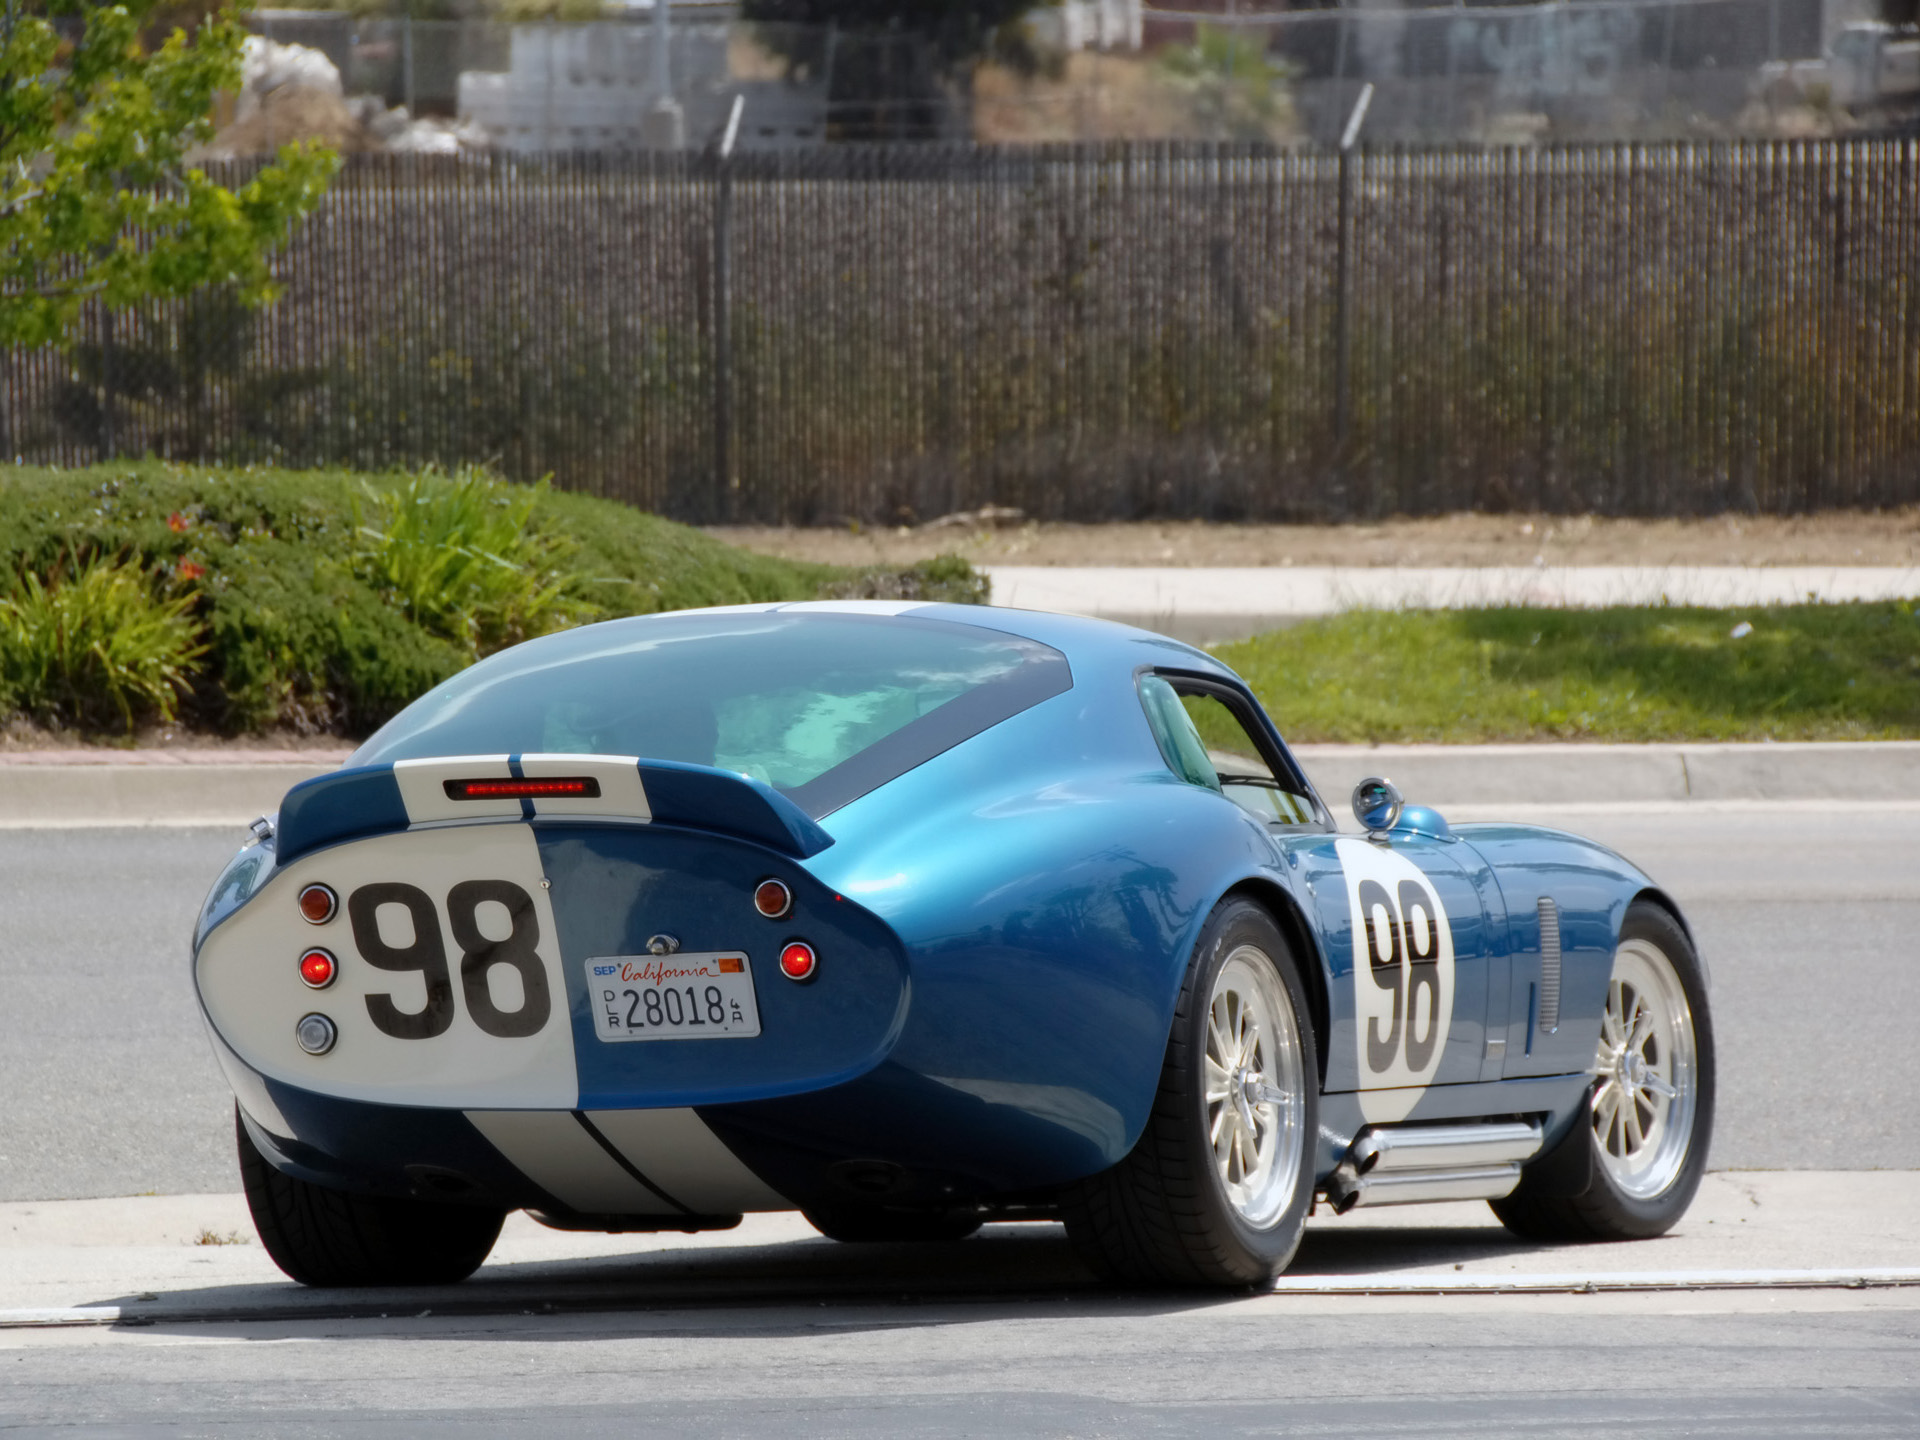 List of options and versions by Shelby cobra. Shelby cobra, Shelby ...